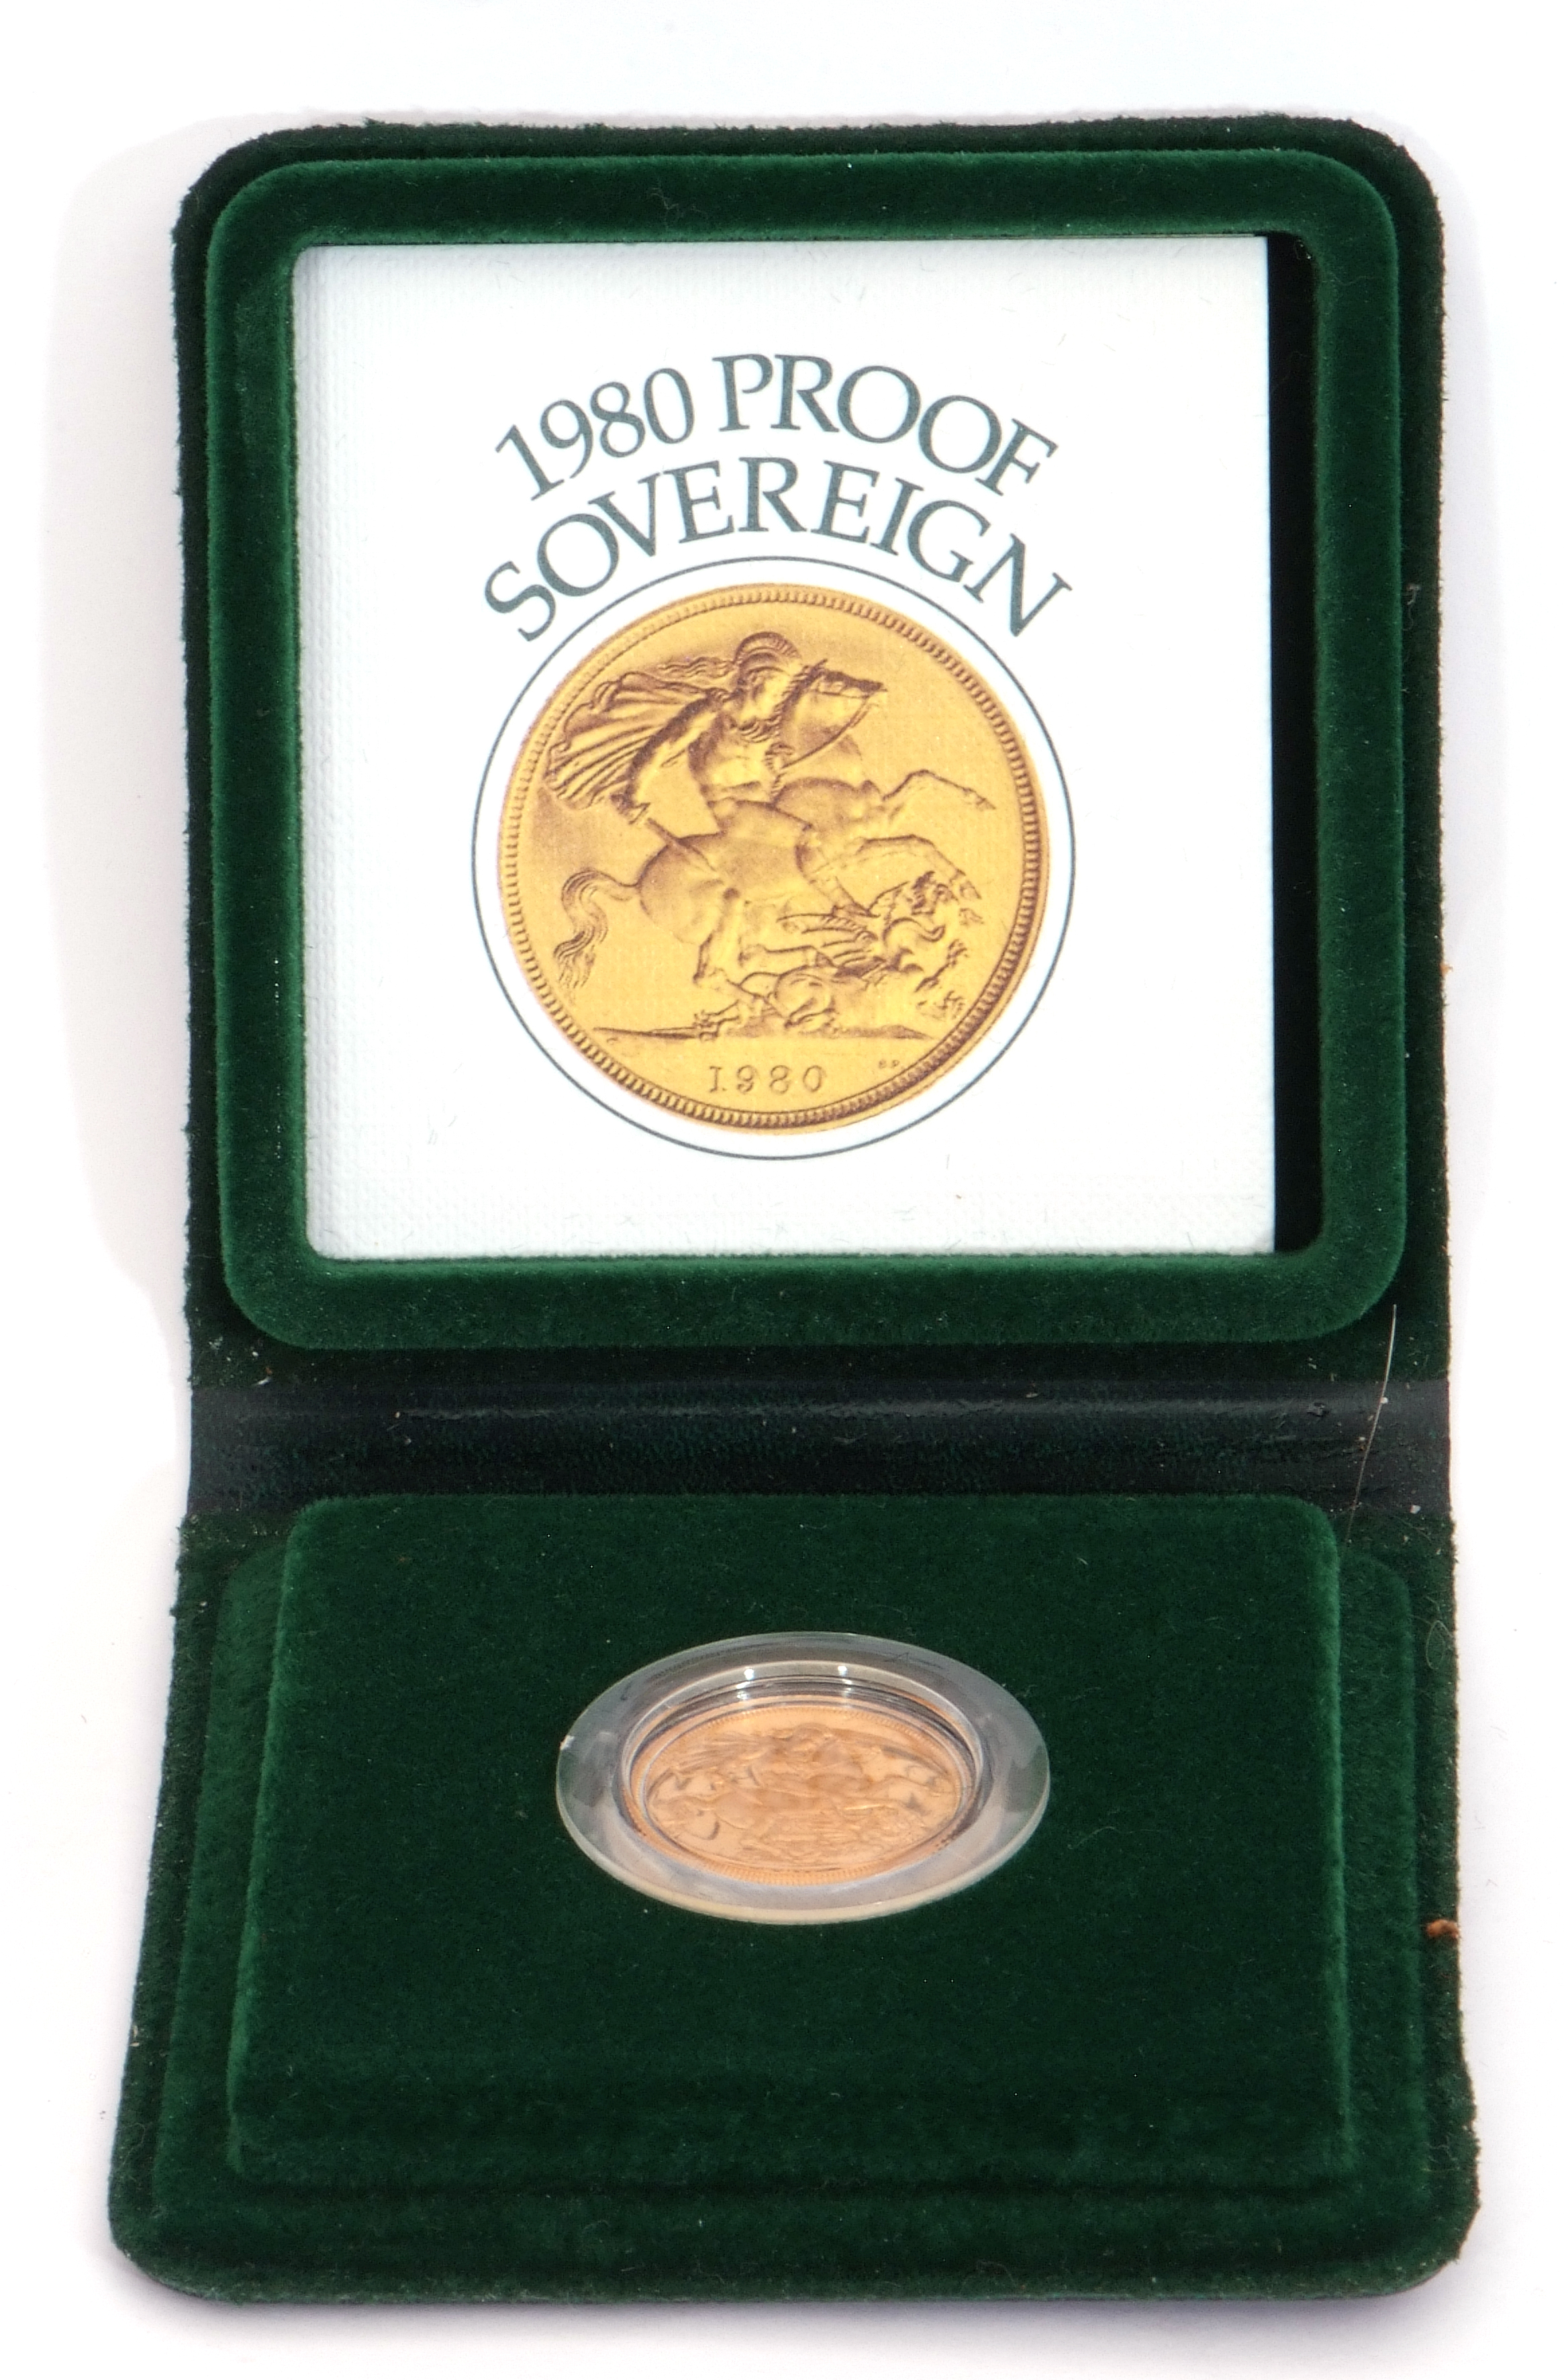 Cased 1980 proof sovereign - Image 3 of 4